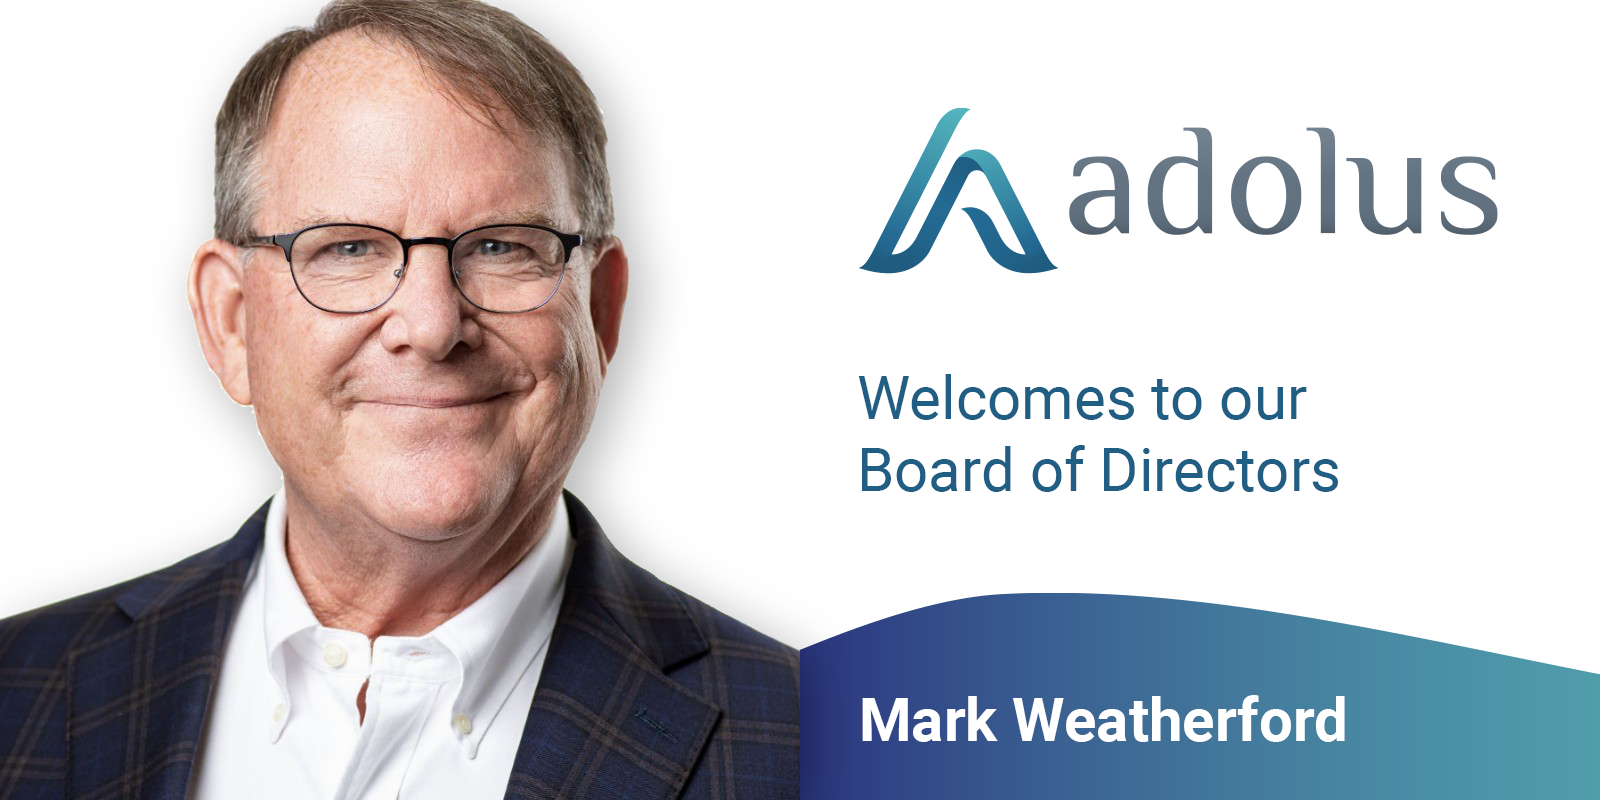 aDolus Welcomes Mark Weatherford to Board